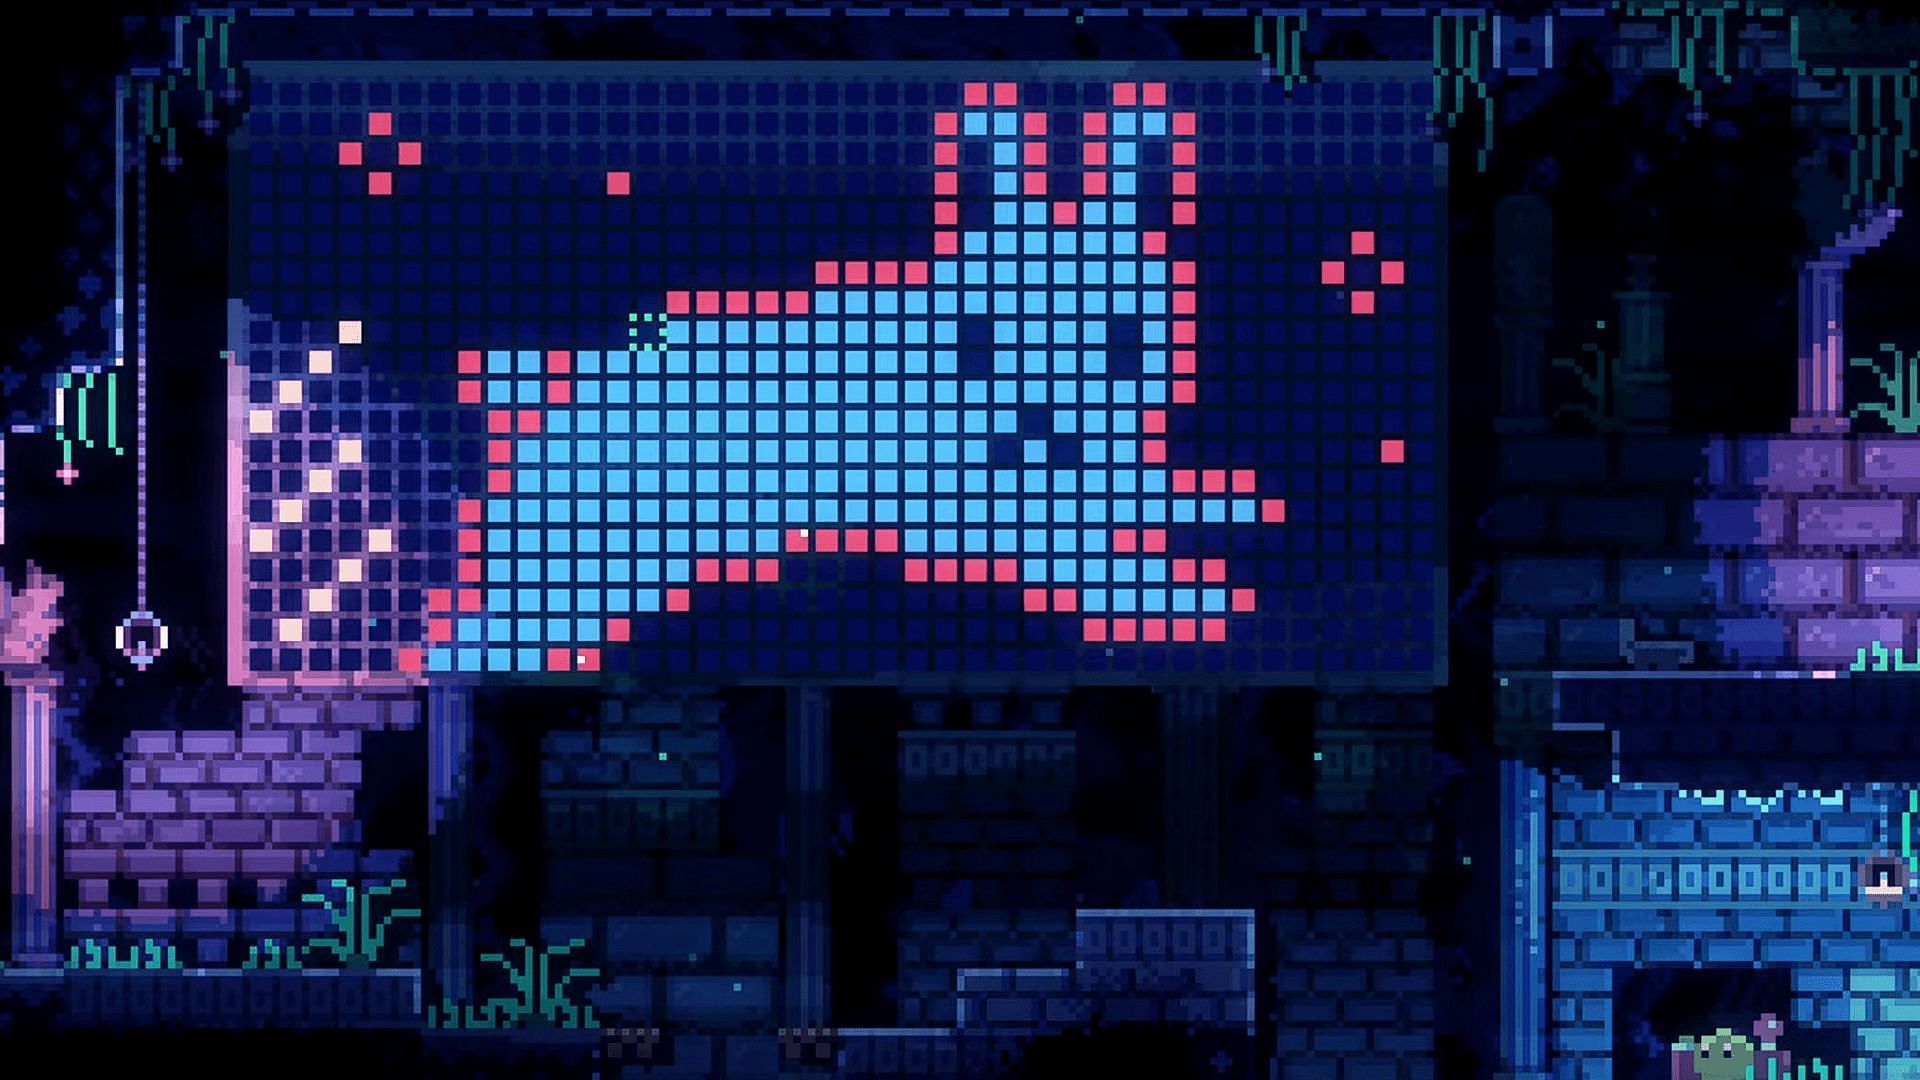 The Bunny Mural in Animal Well (Image via Bigmode)